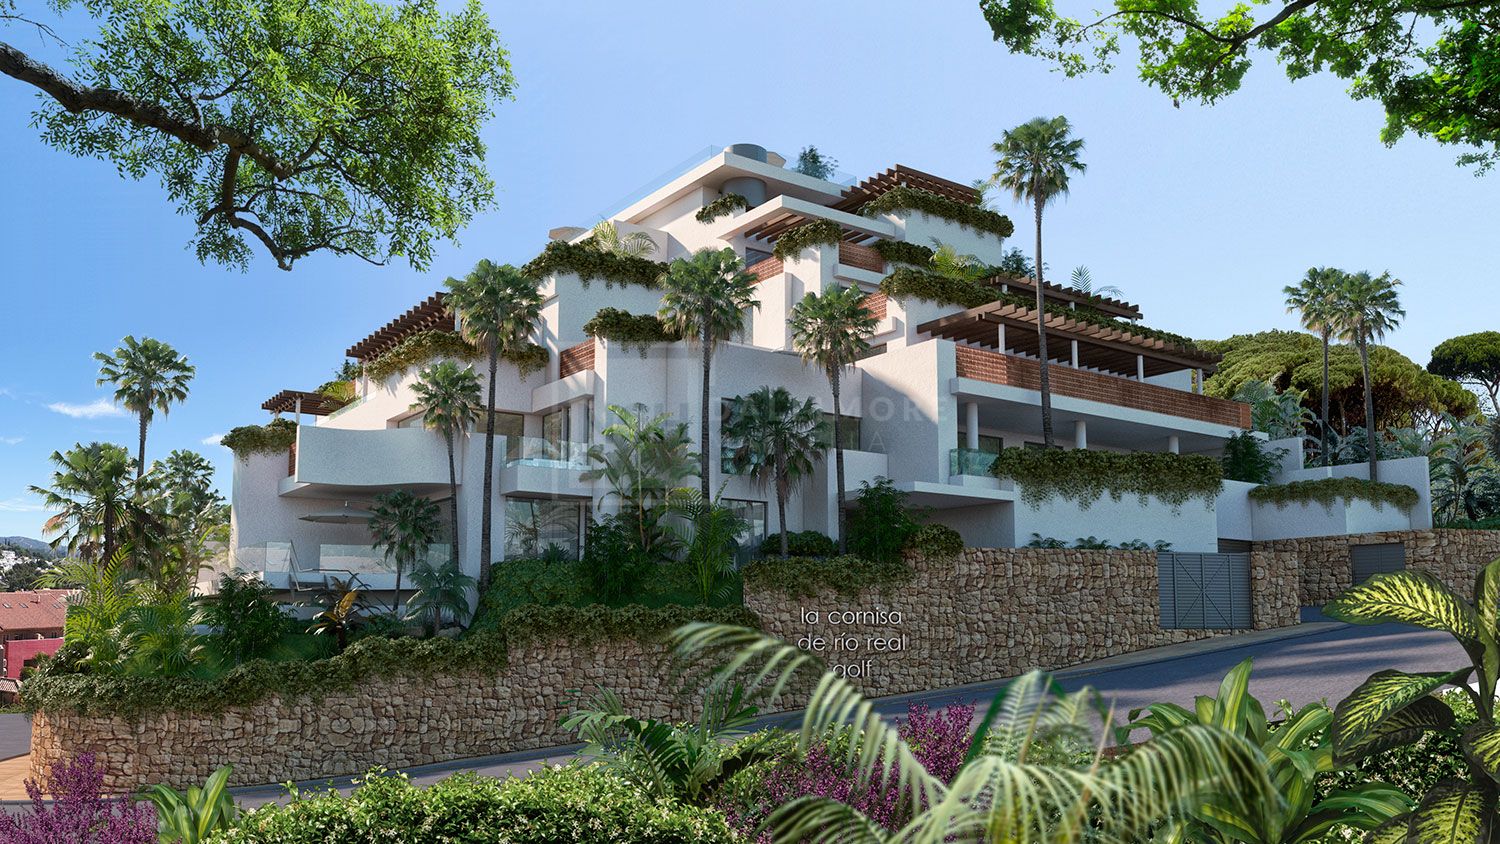 STUNNING BRAND NEW 2-BEDROOM DUPLEX APARTMENT IN RIO REAL MARBELLA